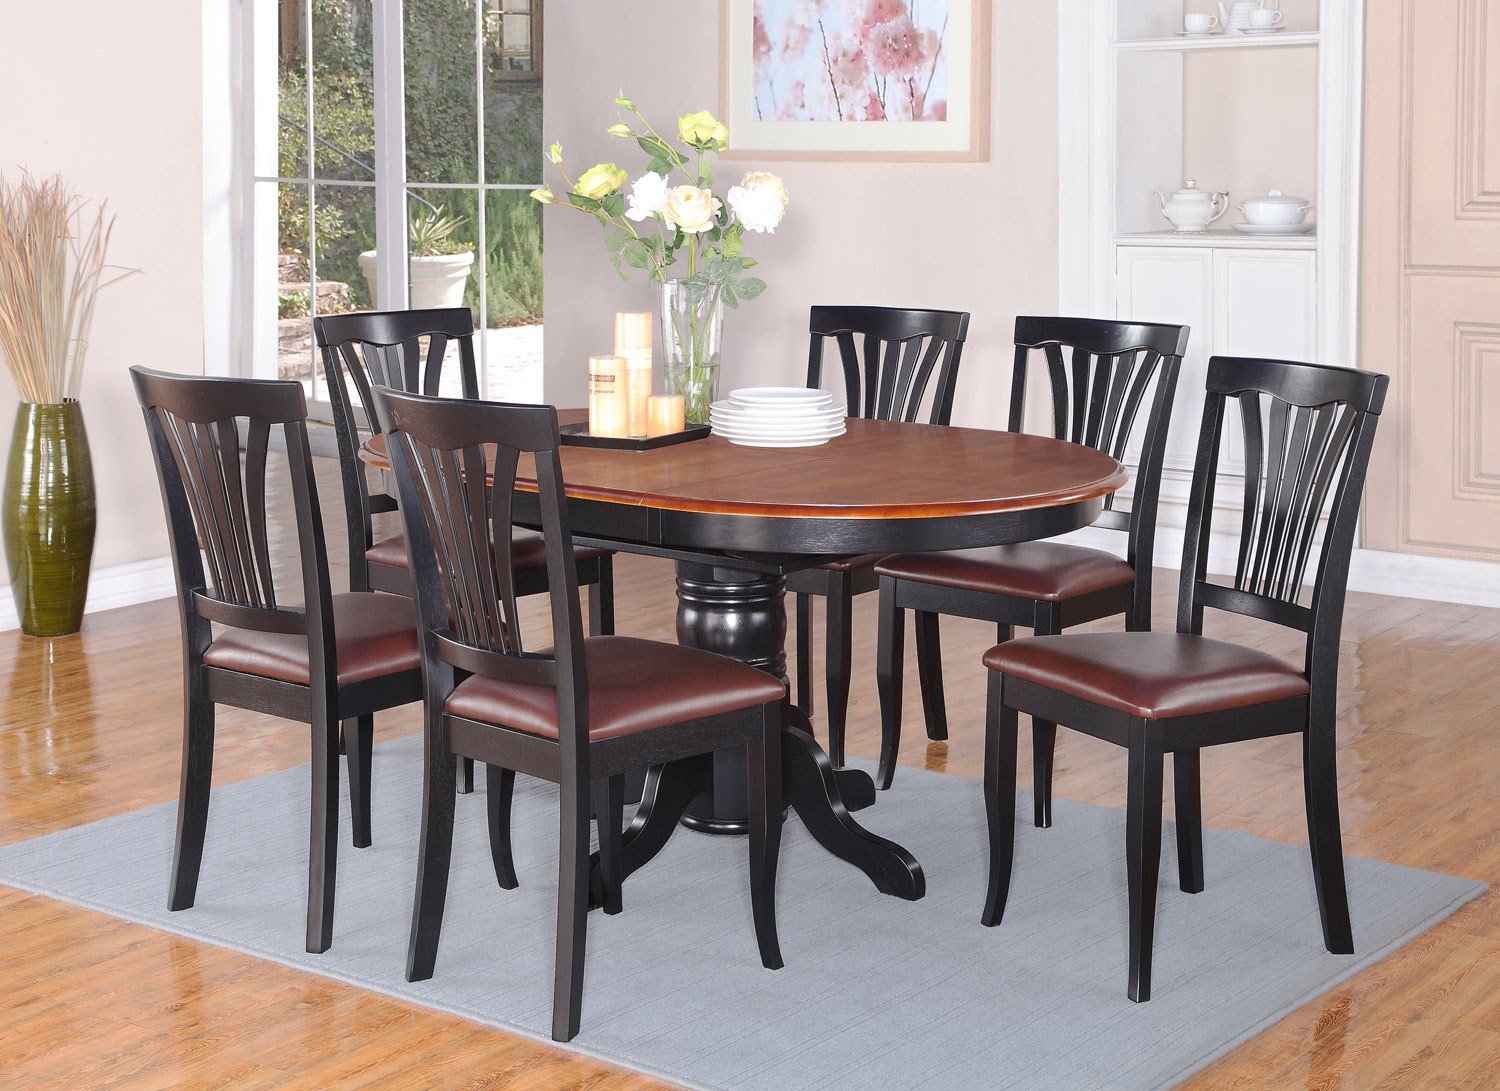 East West Furniture AVON7-BLK-LC 7PC Oval Dining Set with Single Pedestal with 18 in. butterfly leaf and 6 Faux Leather seat chairs